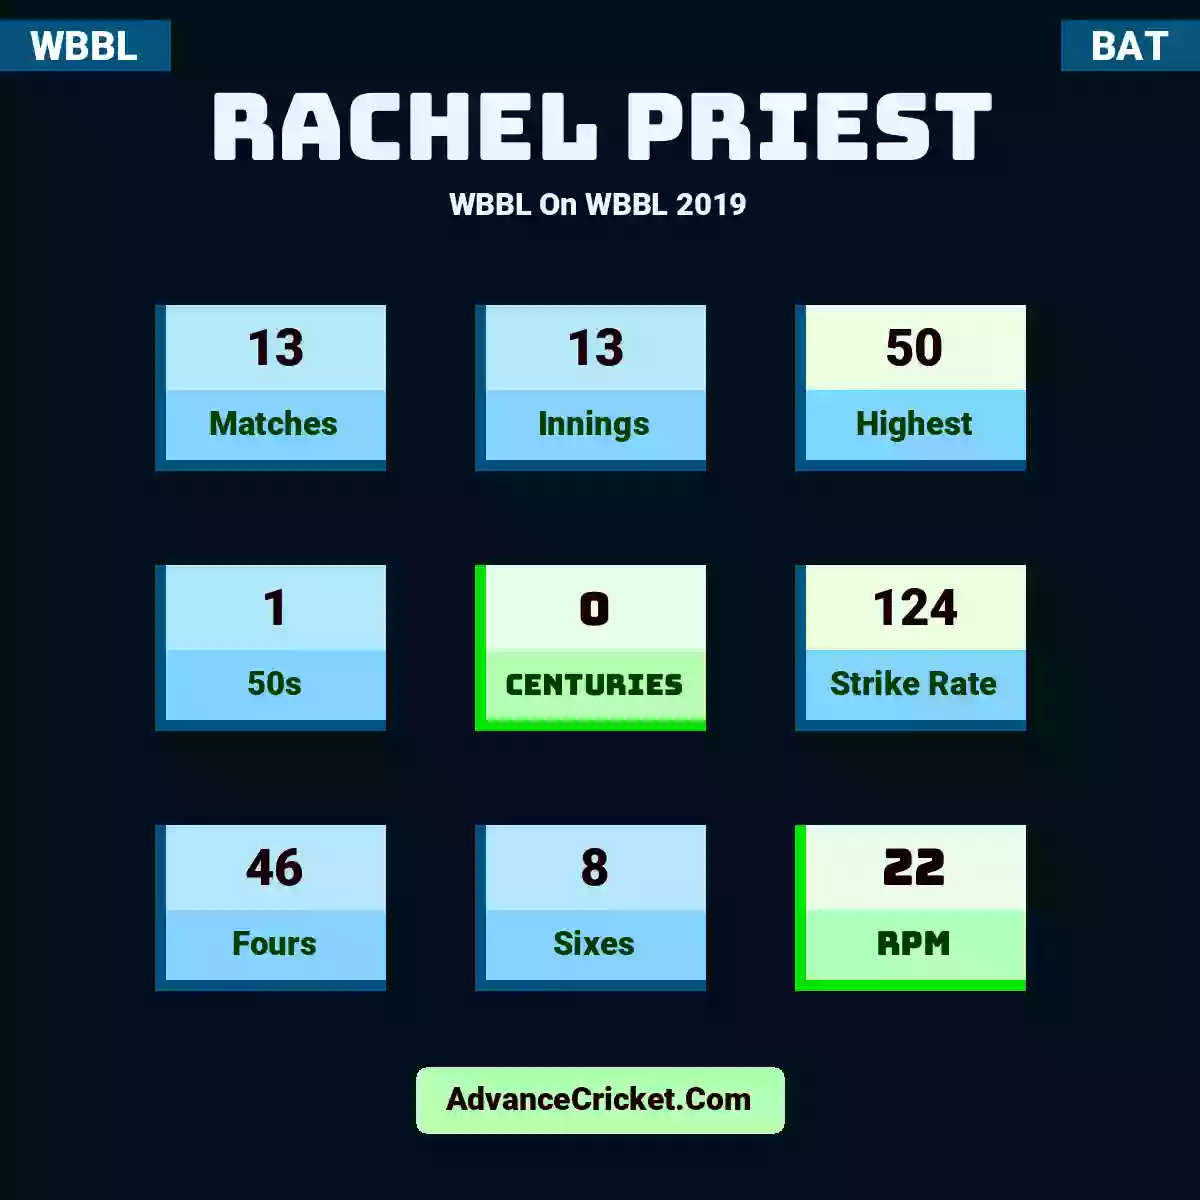 Rachel Priest WBBL  On WBBL 2019, Rachel Priest played 13 matches, scored 50 runs as highest, 1 half-centuries, and 0 centuries, with a strike rate of 124. R.Priest hit 46 fours and 8 sixes, with an RPM of 22.